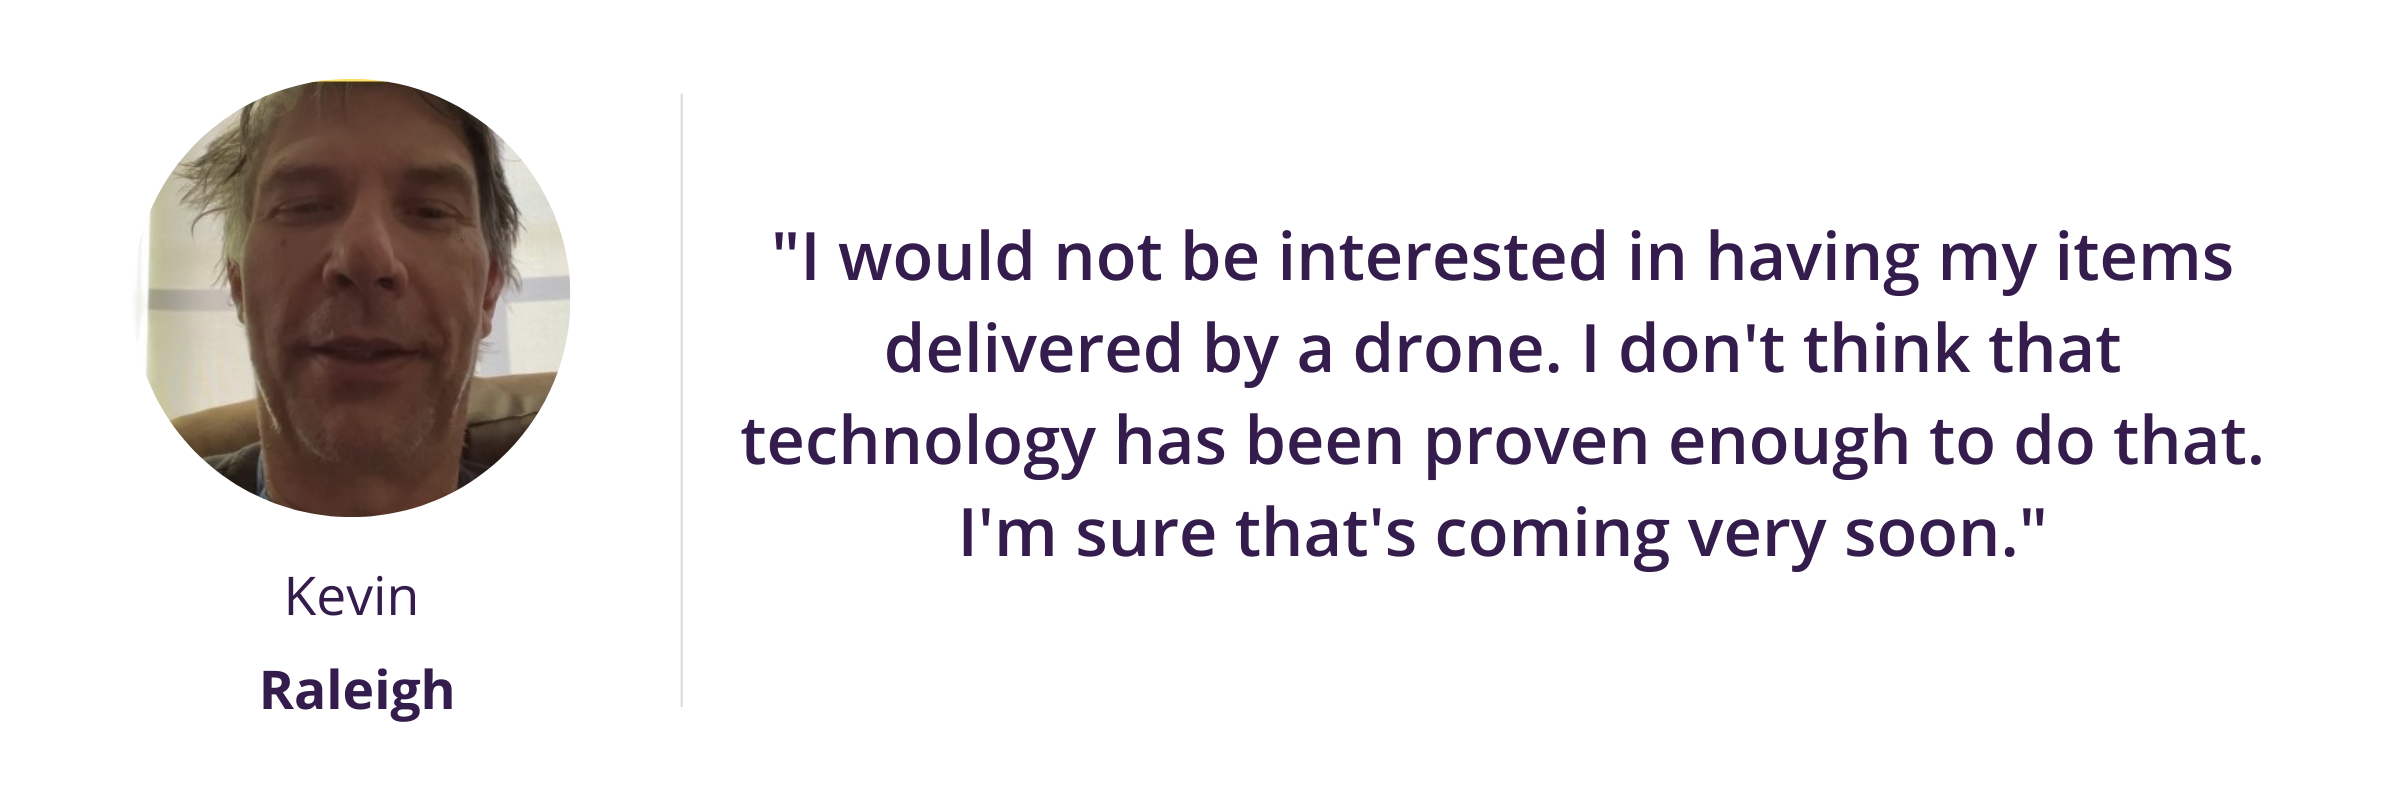 "I would not be interested in having my items delivered by a drone. I don't think that technology has been proven enough to do that. I'm sure that's coming very soon."